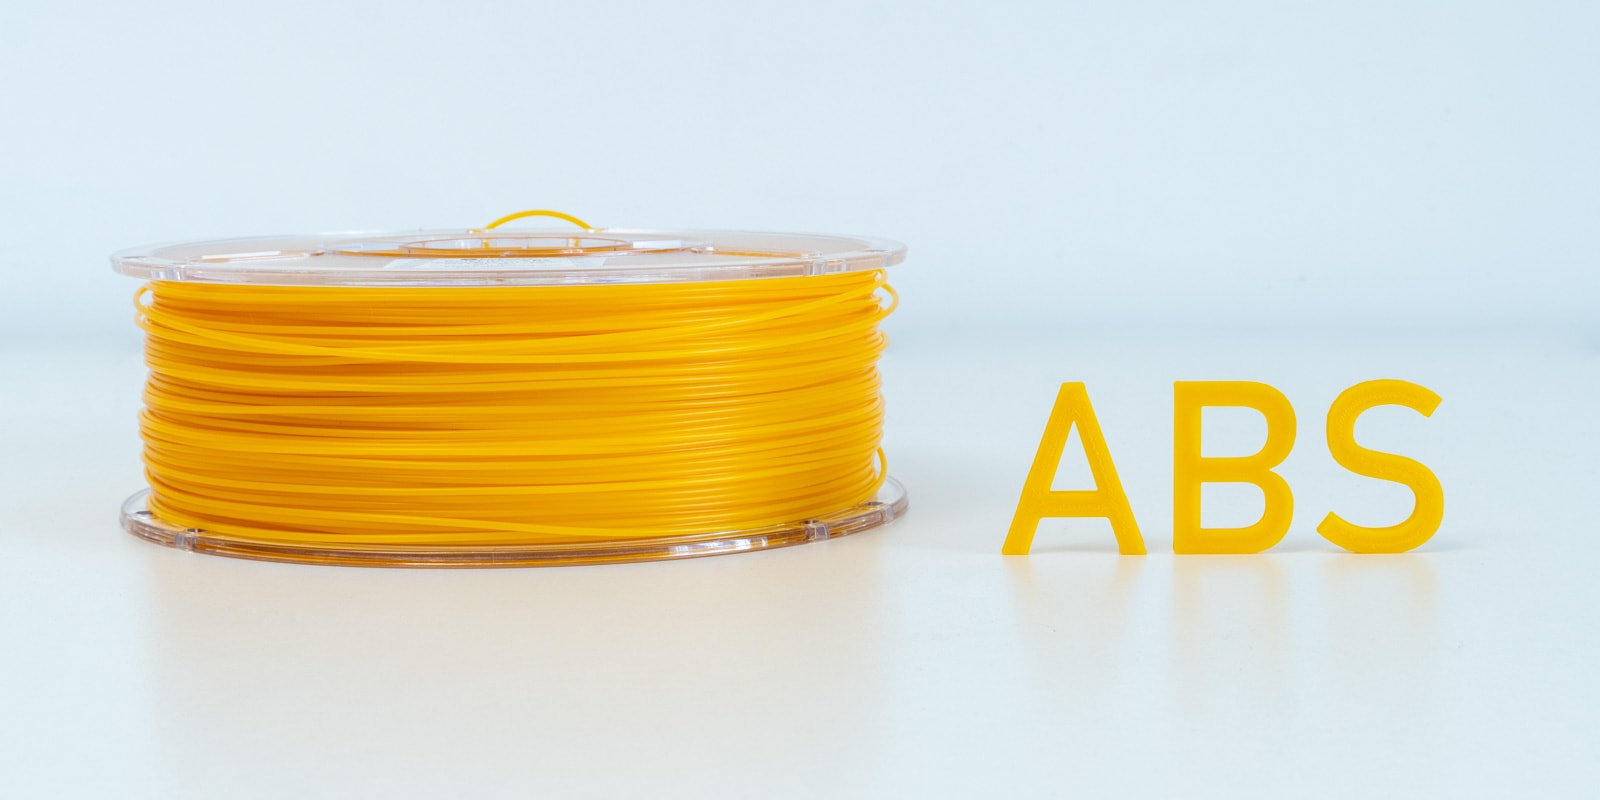 A roll of ABS 3D printing filament next to letters printed out of the same material.